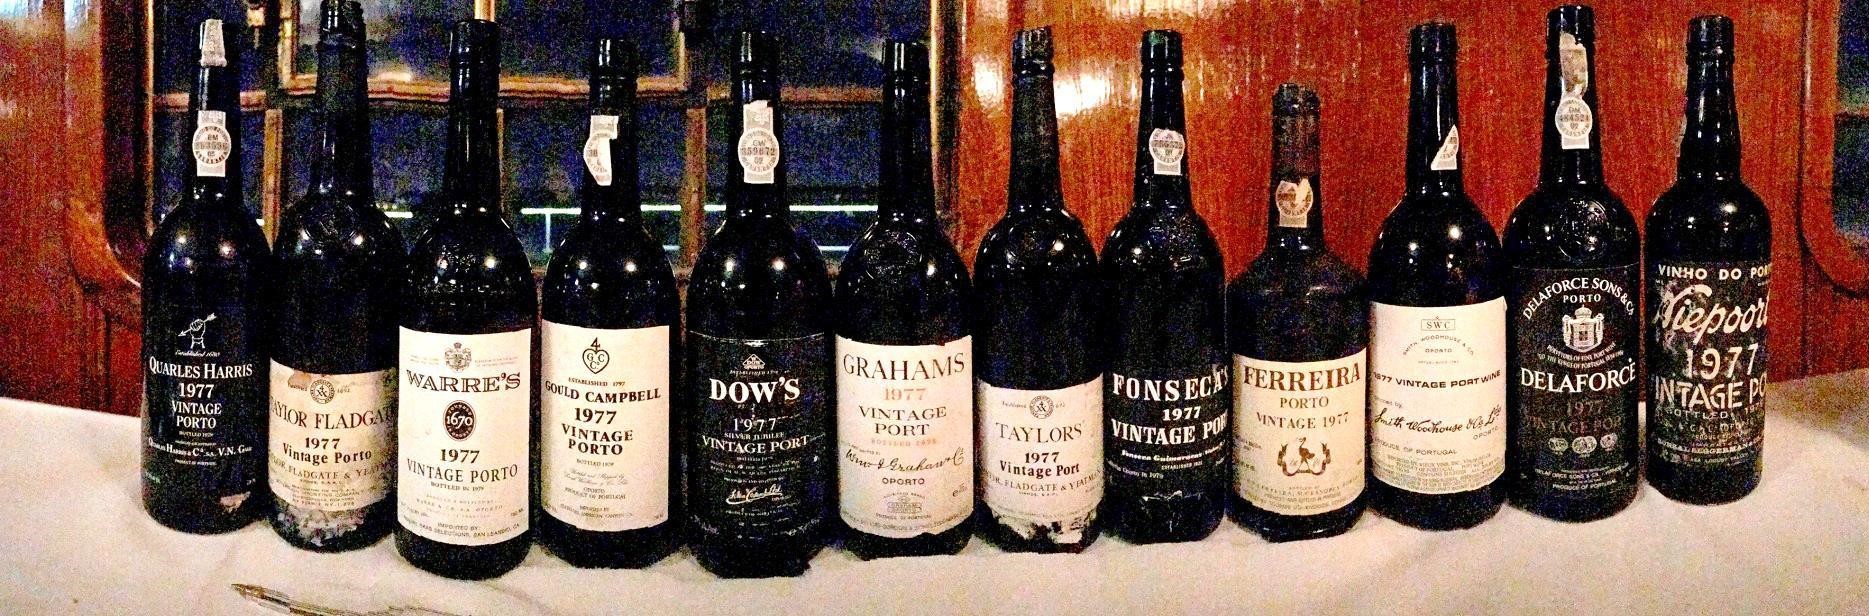 40 Years After: 1977 Vintage Port - For The Love Of Port